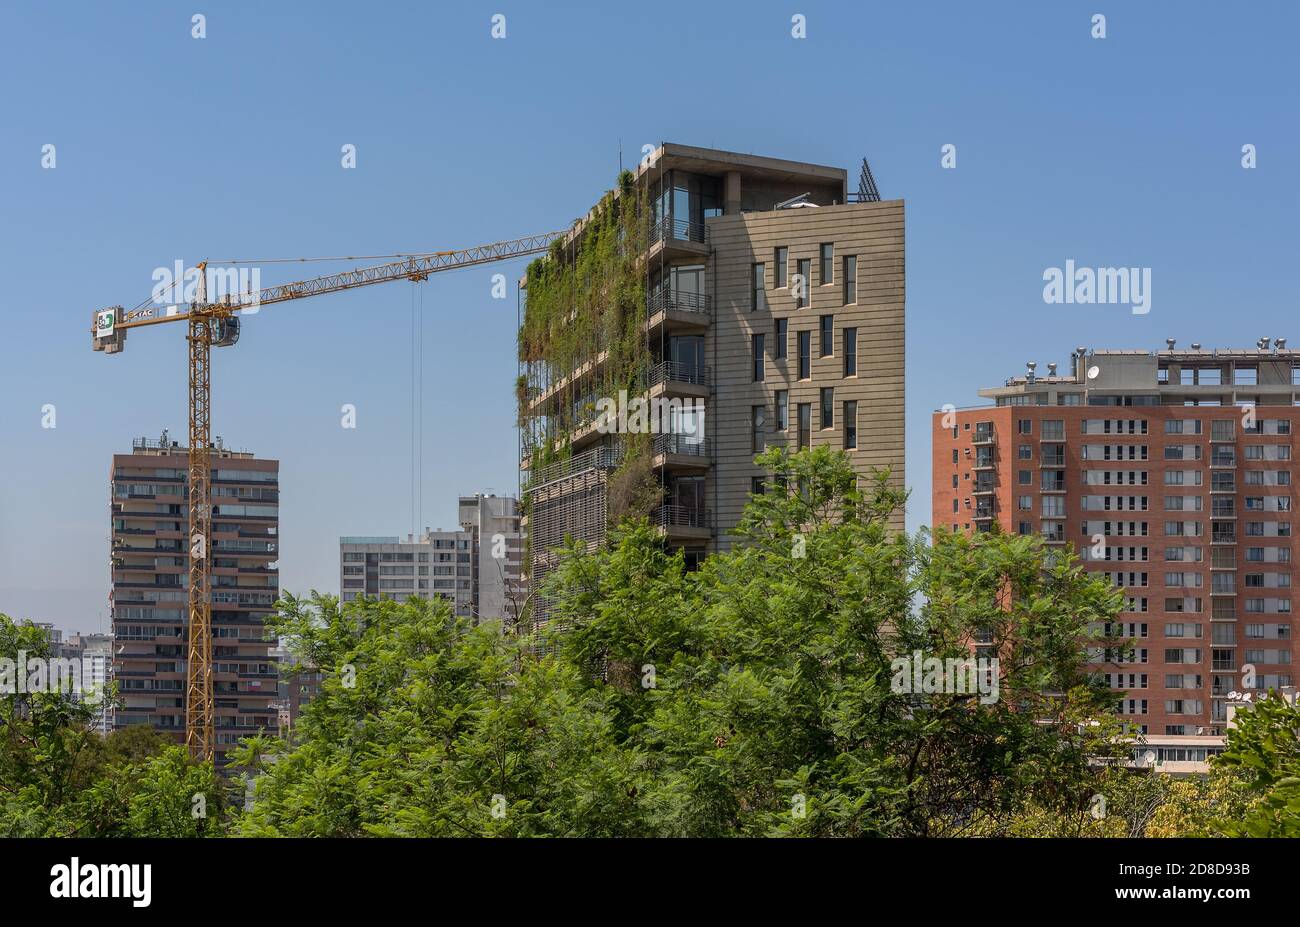 Green skyscraper building with plants growing on the facade, Santiago, Chile Stock Photo